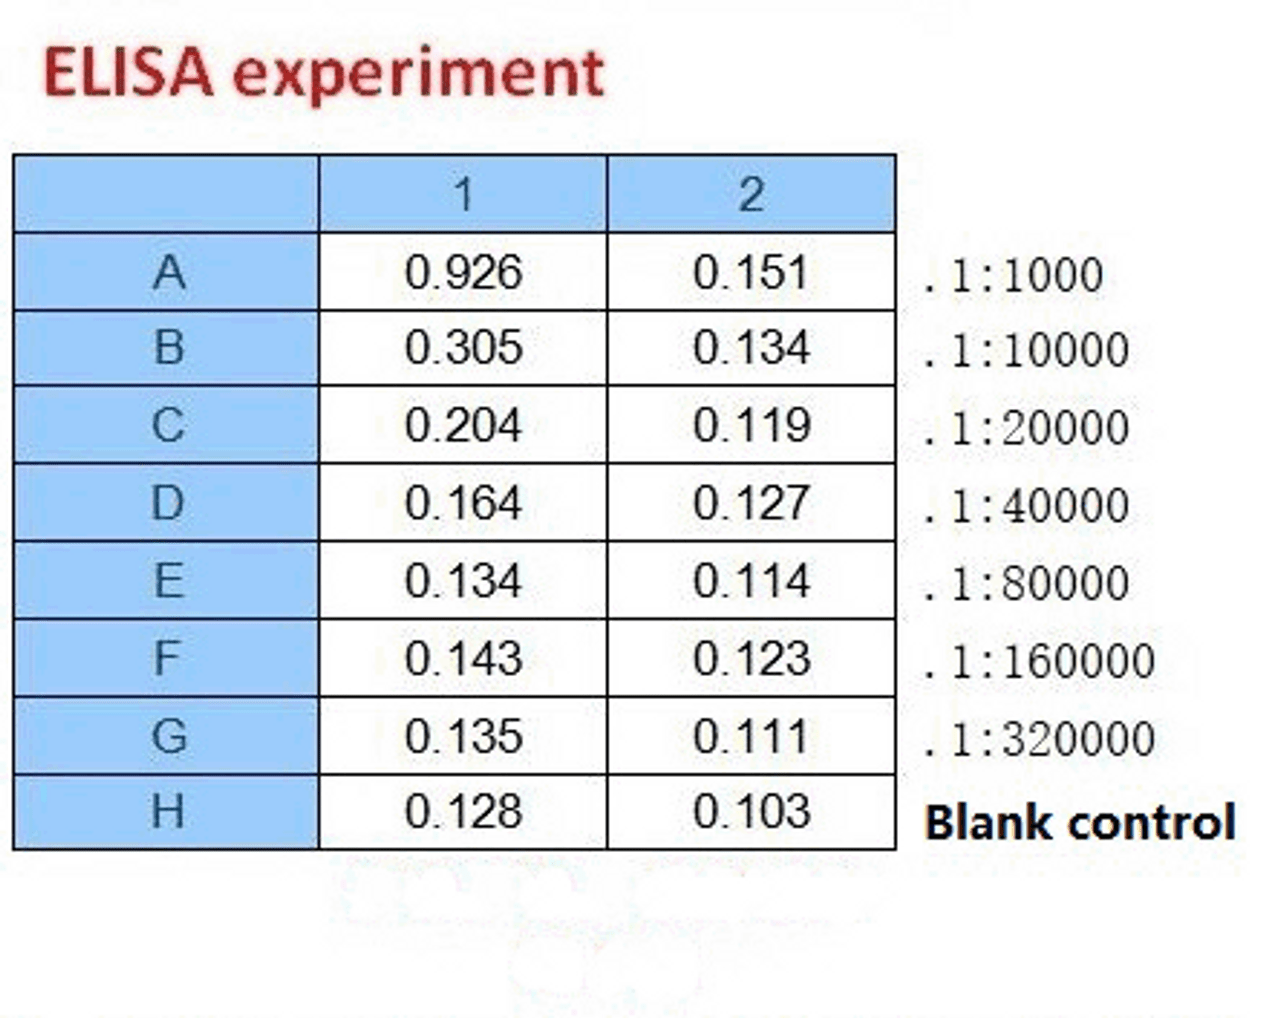 <strong>Figure 2 ELISA Test</strong><br>
Coating original concentration: 2 ug/mL, 100 uL/well samples are column 1: SARS-CoV-2 (COVID-19) Spike-ECD Recombinant Protein, 10-011, and column 2: SARS-CoV-2 (COVID-19) Spike-RBD Recombinant Protein, 10-008.<br>Antibodies: SARS-CoV-2 (COVID-19) Spike S1 Antibody, 10-523.<br>Secondary: Goat anti-rabbit IgG HRP conjugate at 1:10000 dilution.<br>Develop: 15min, 100 uL/well.<br>Stop: Stop buffer 50 uL/well.